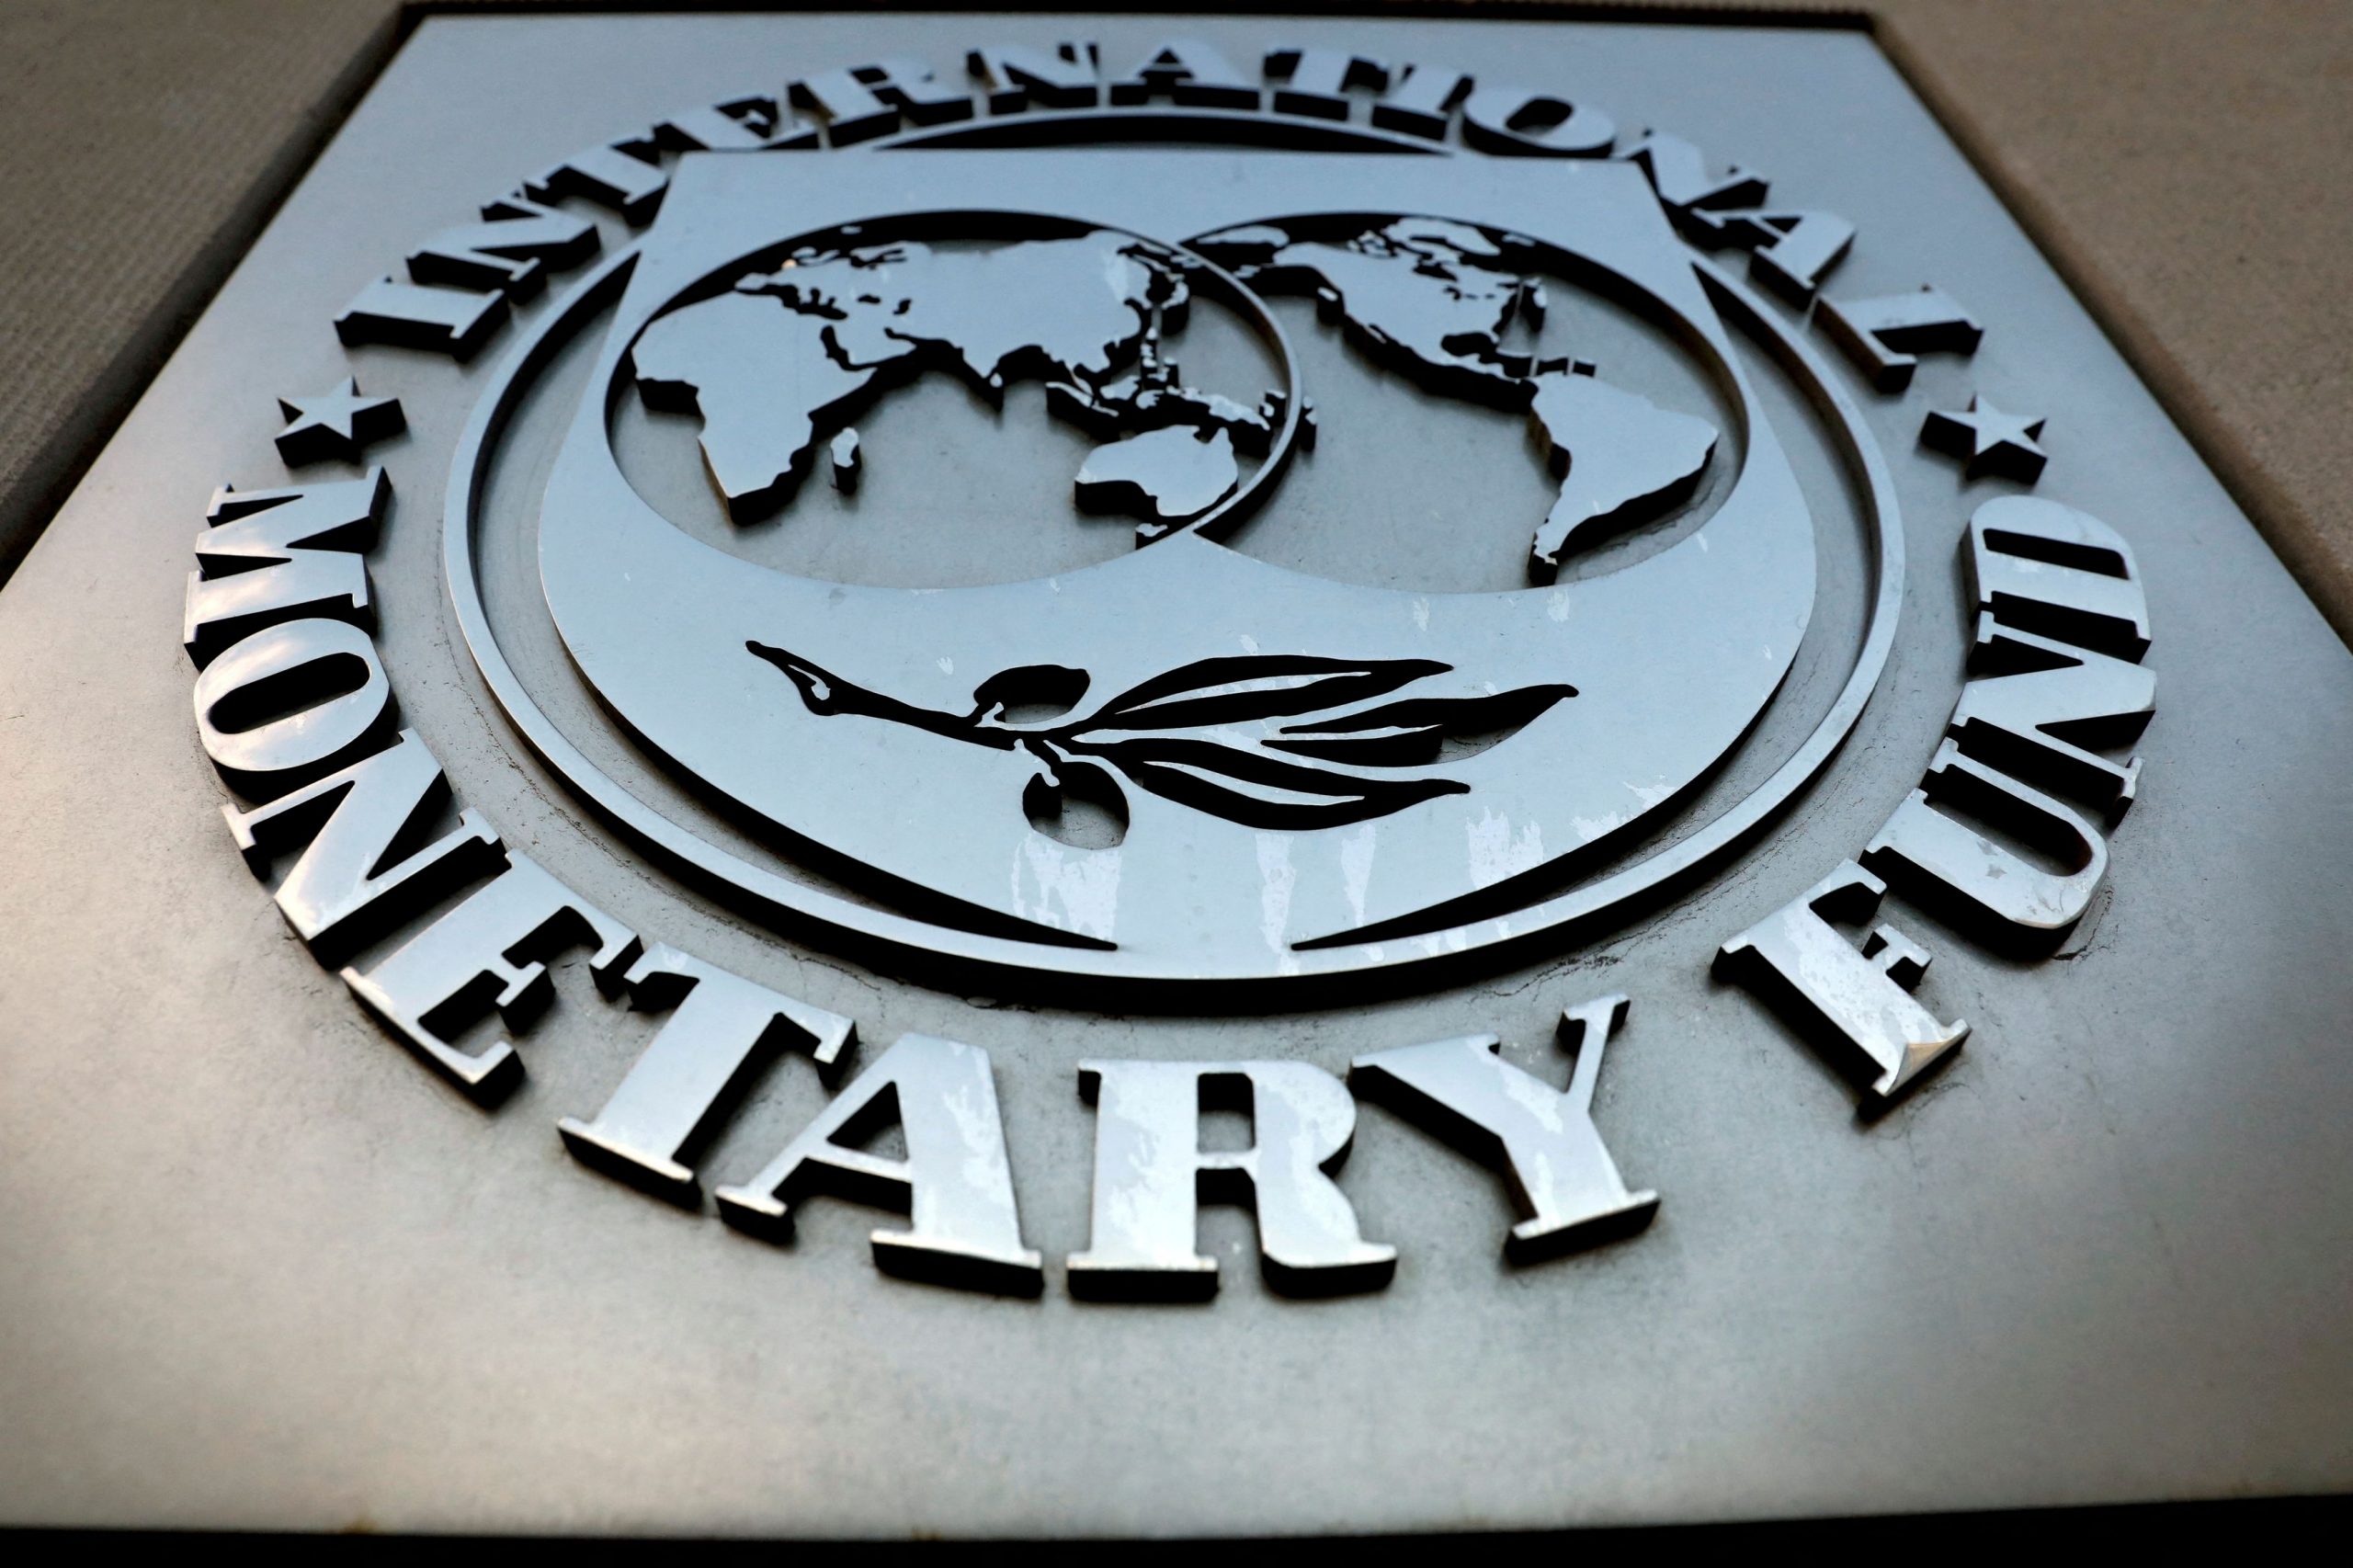 IMF: Recommendation to Greece to restrain salaries and pensions